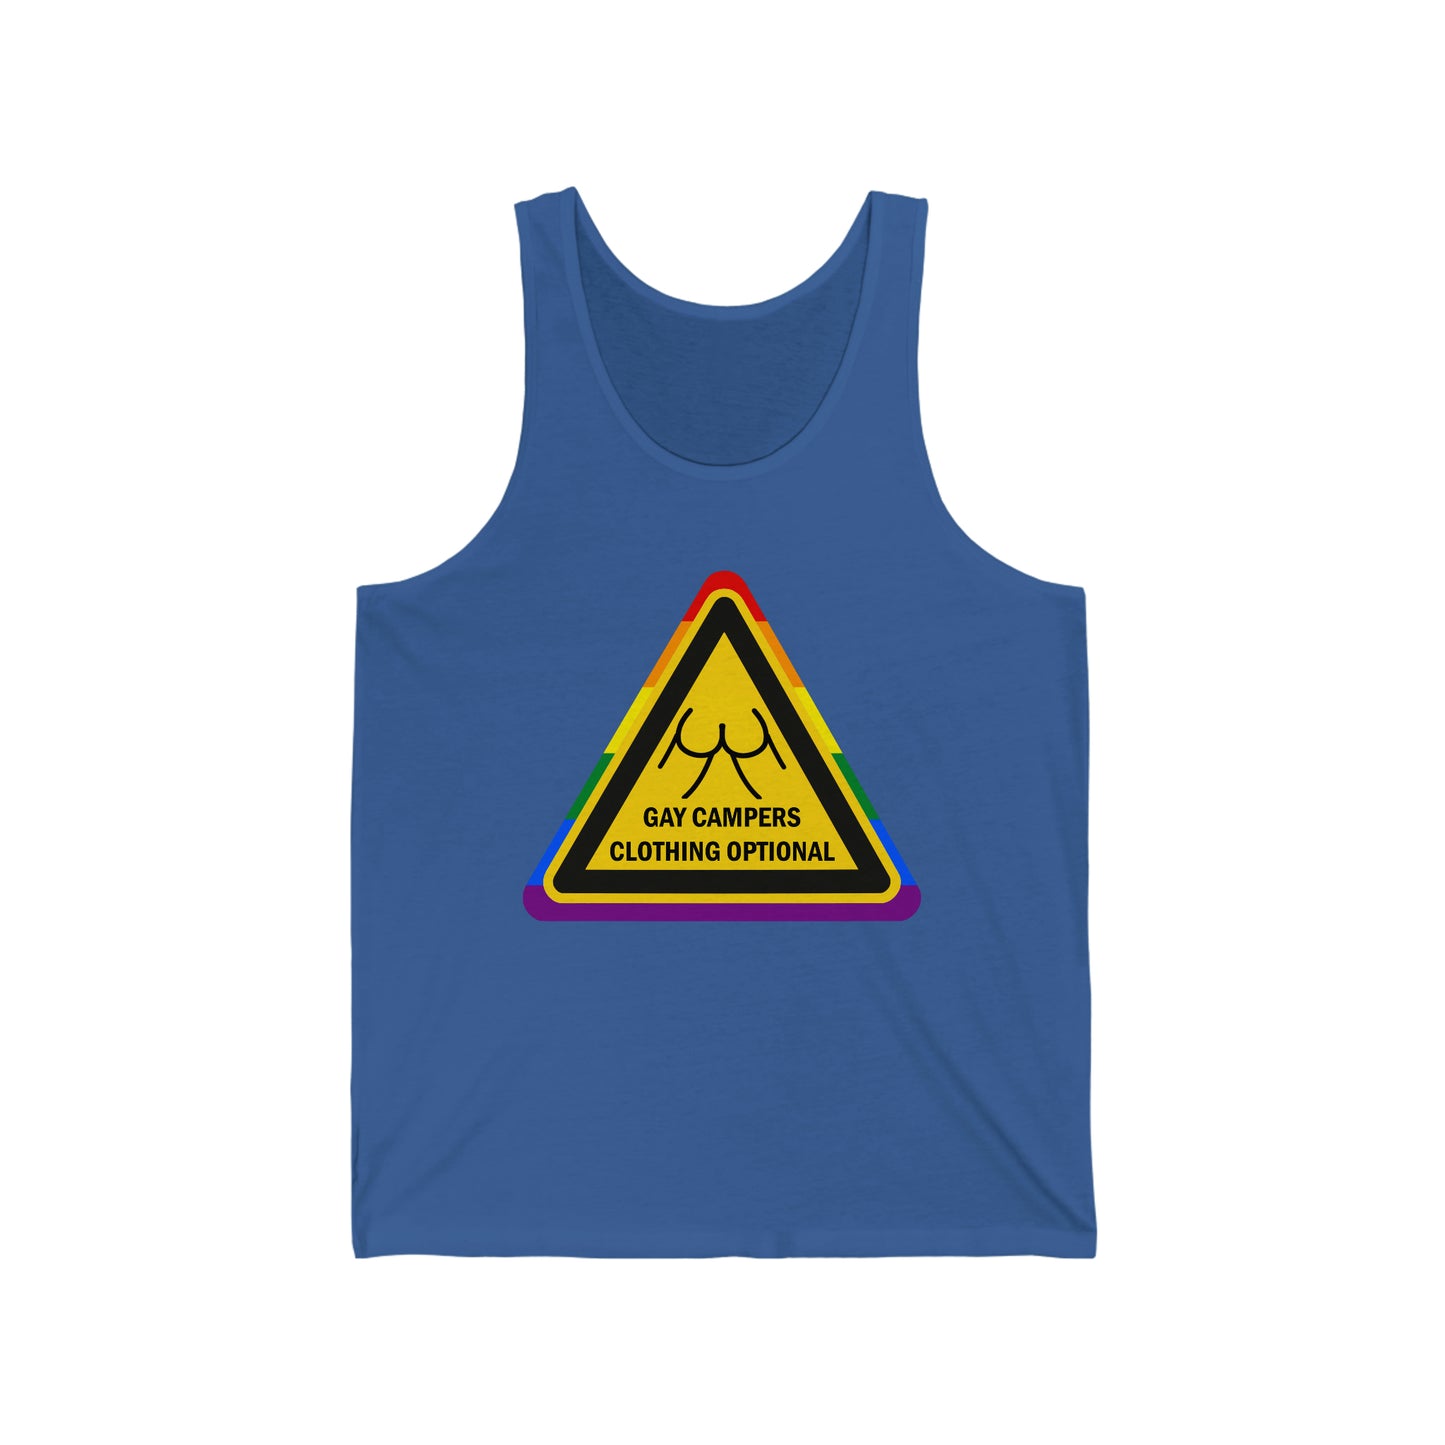 Gay Campers - Clothing Optional Warning Sign Adult Unisex Tank Top